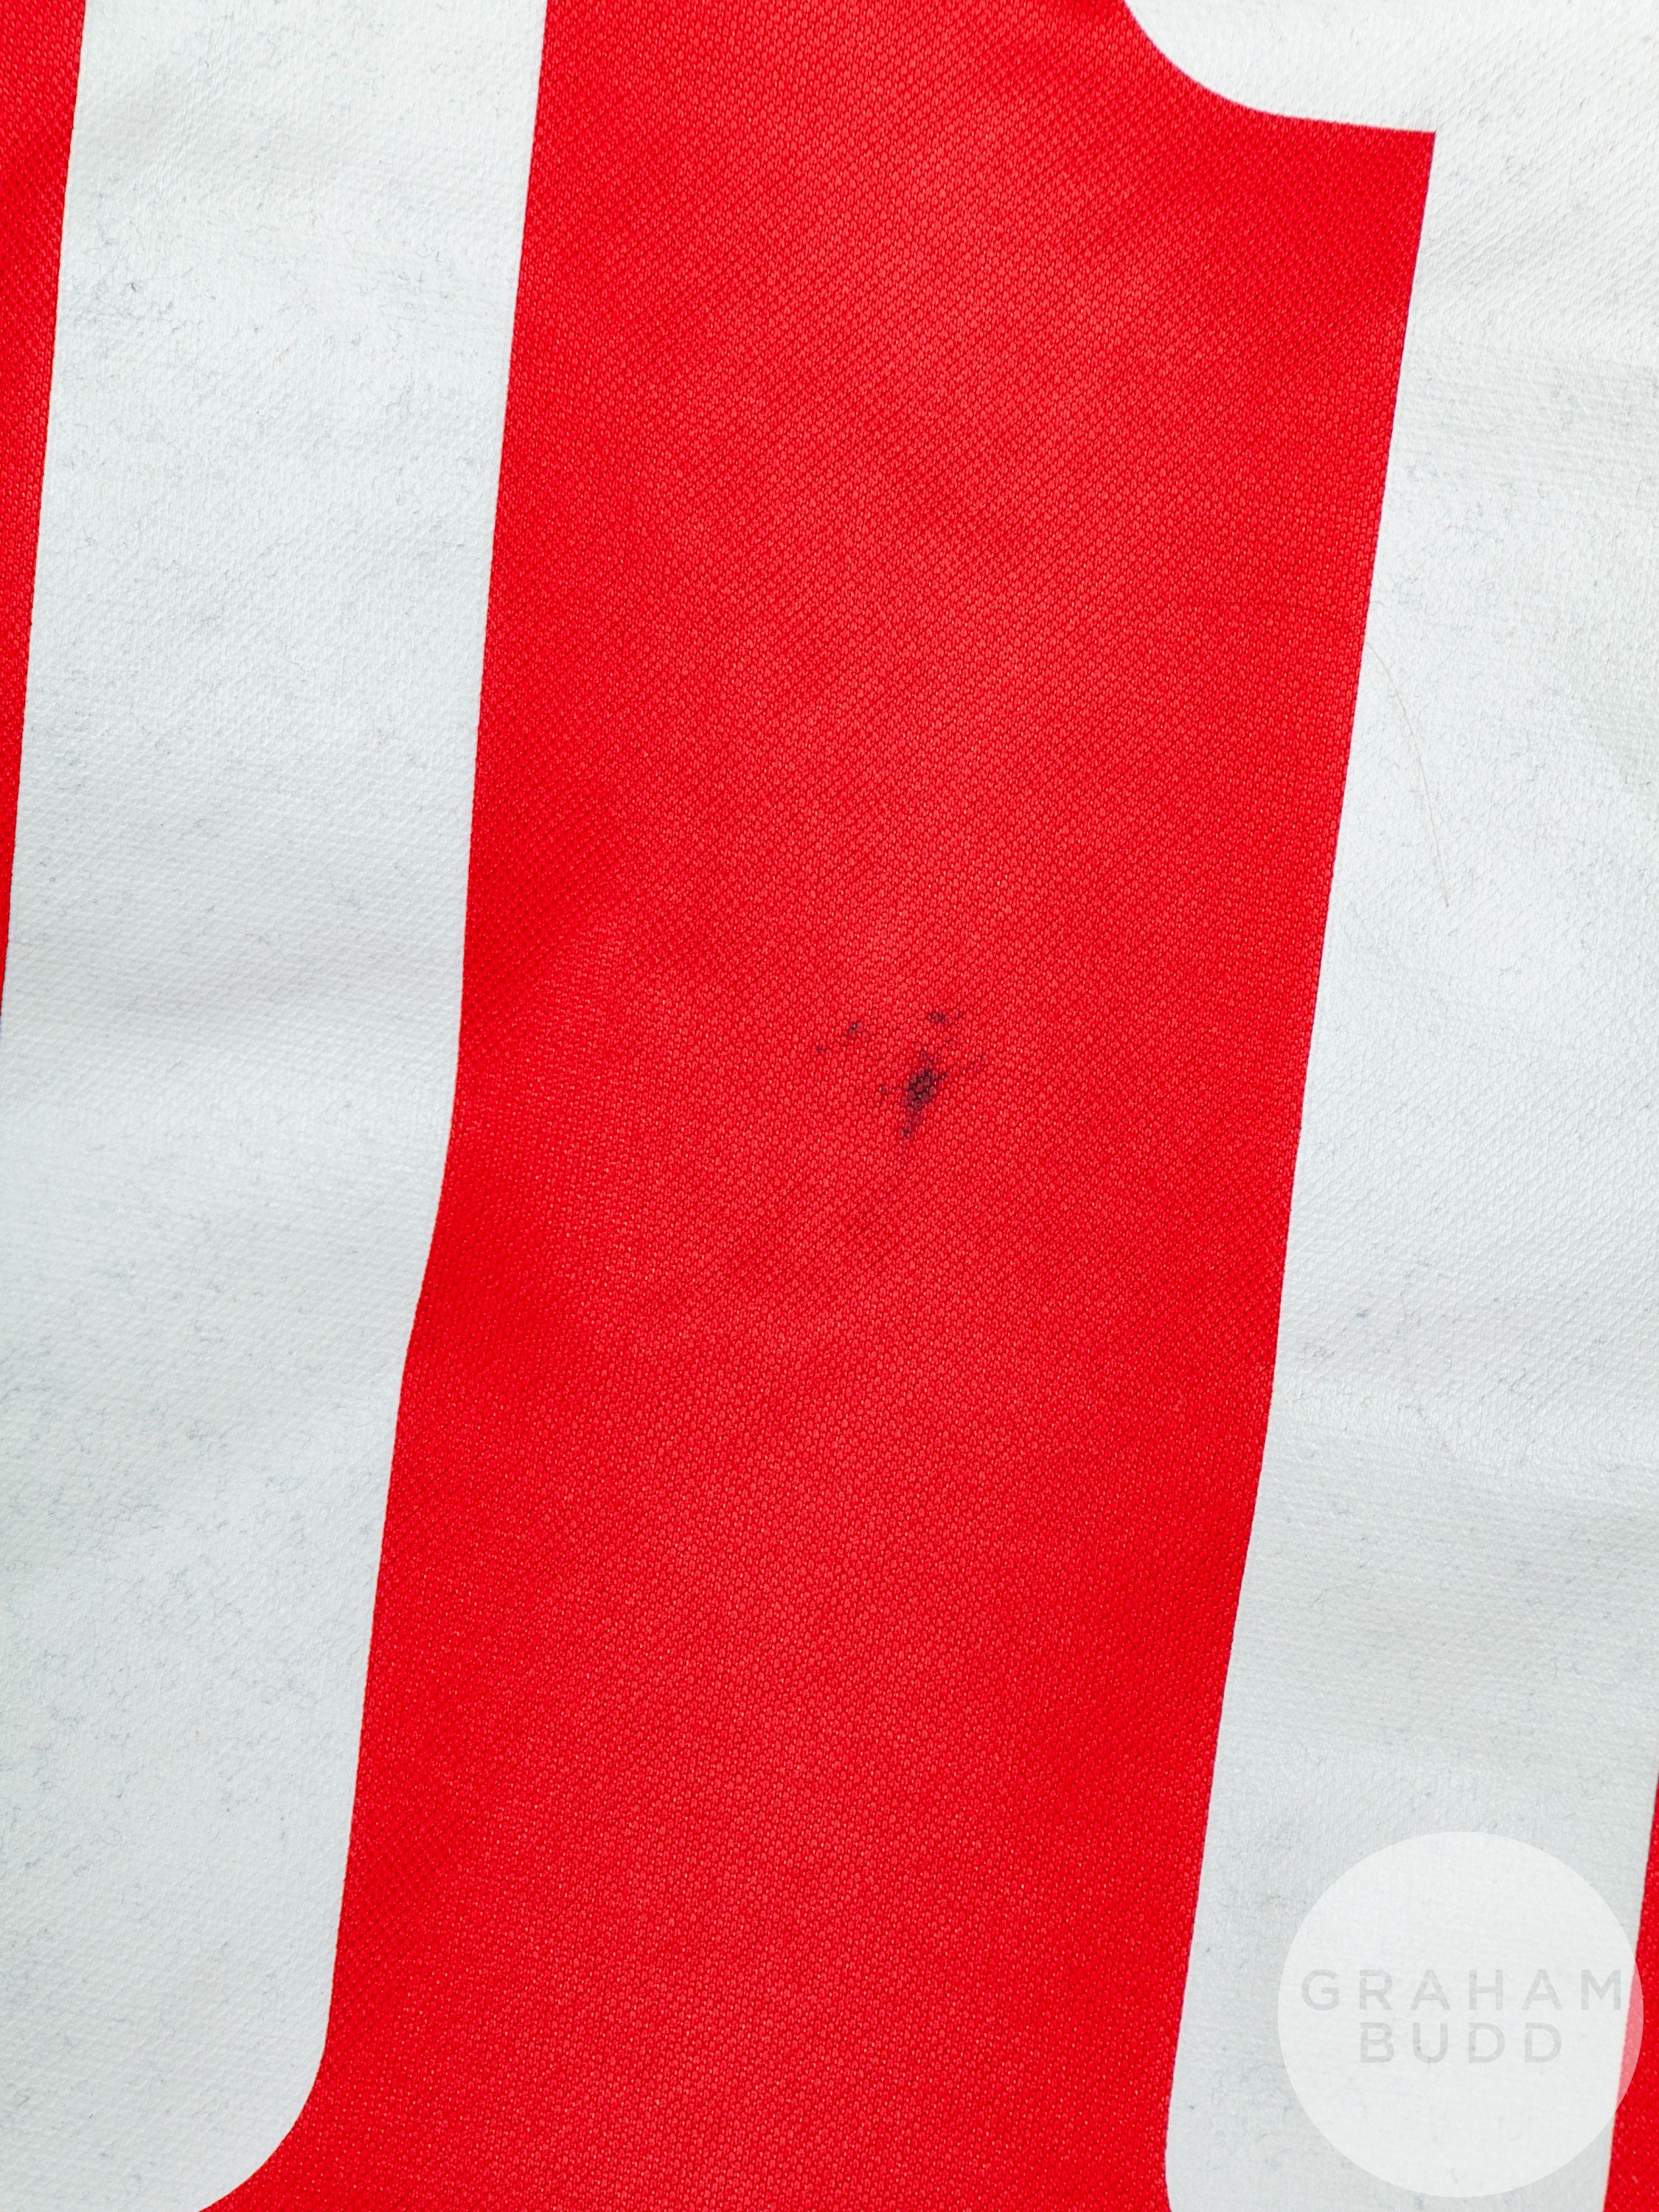 Olaf Marschall red and black No.11 Kaiserslautern long-sleeved shirt, 2000 - Image 6 of 6